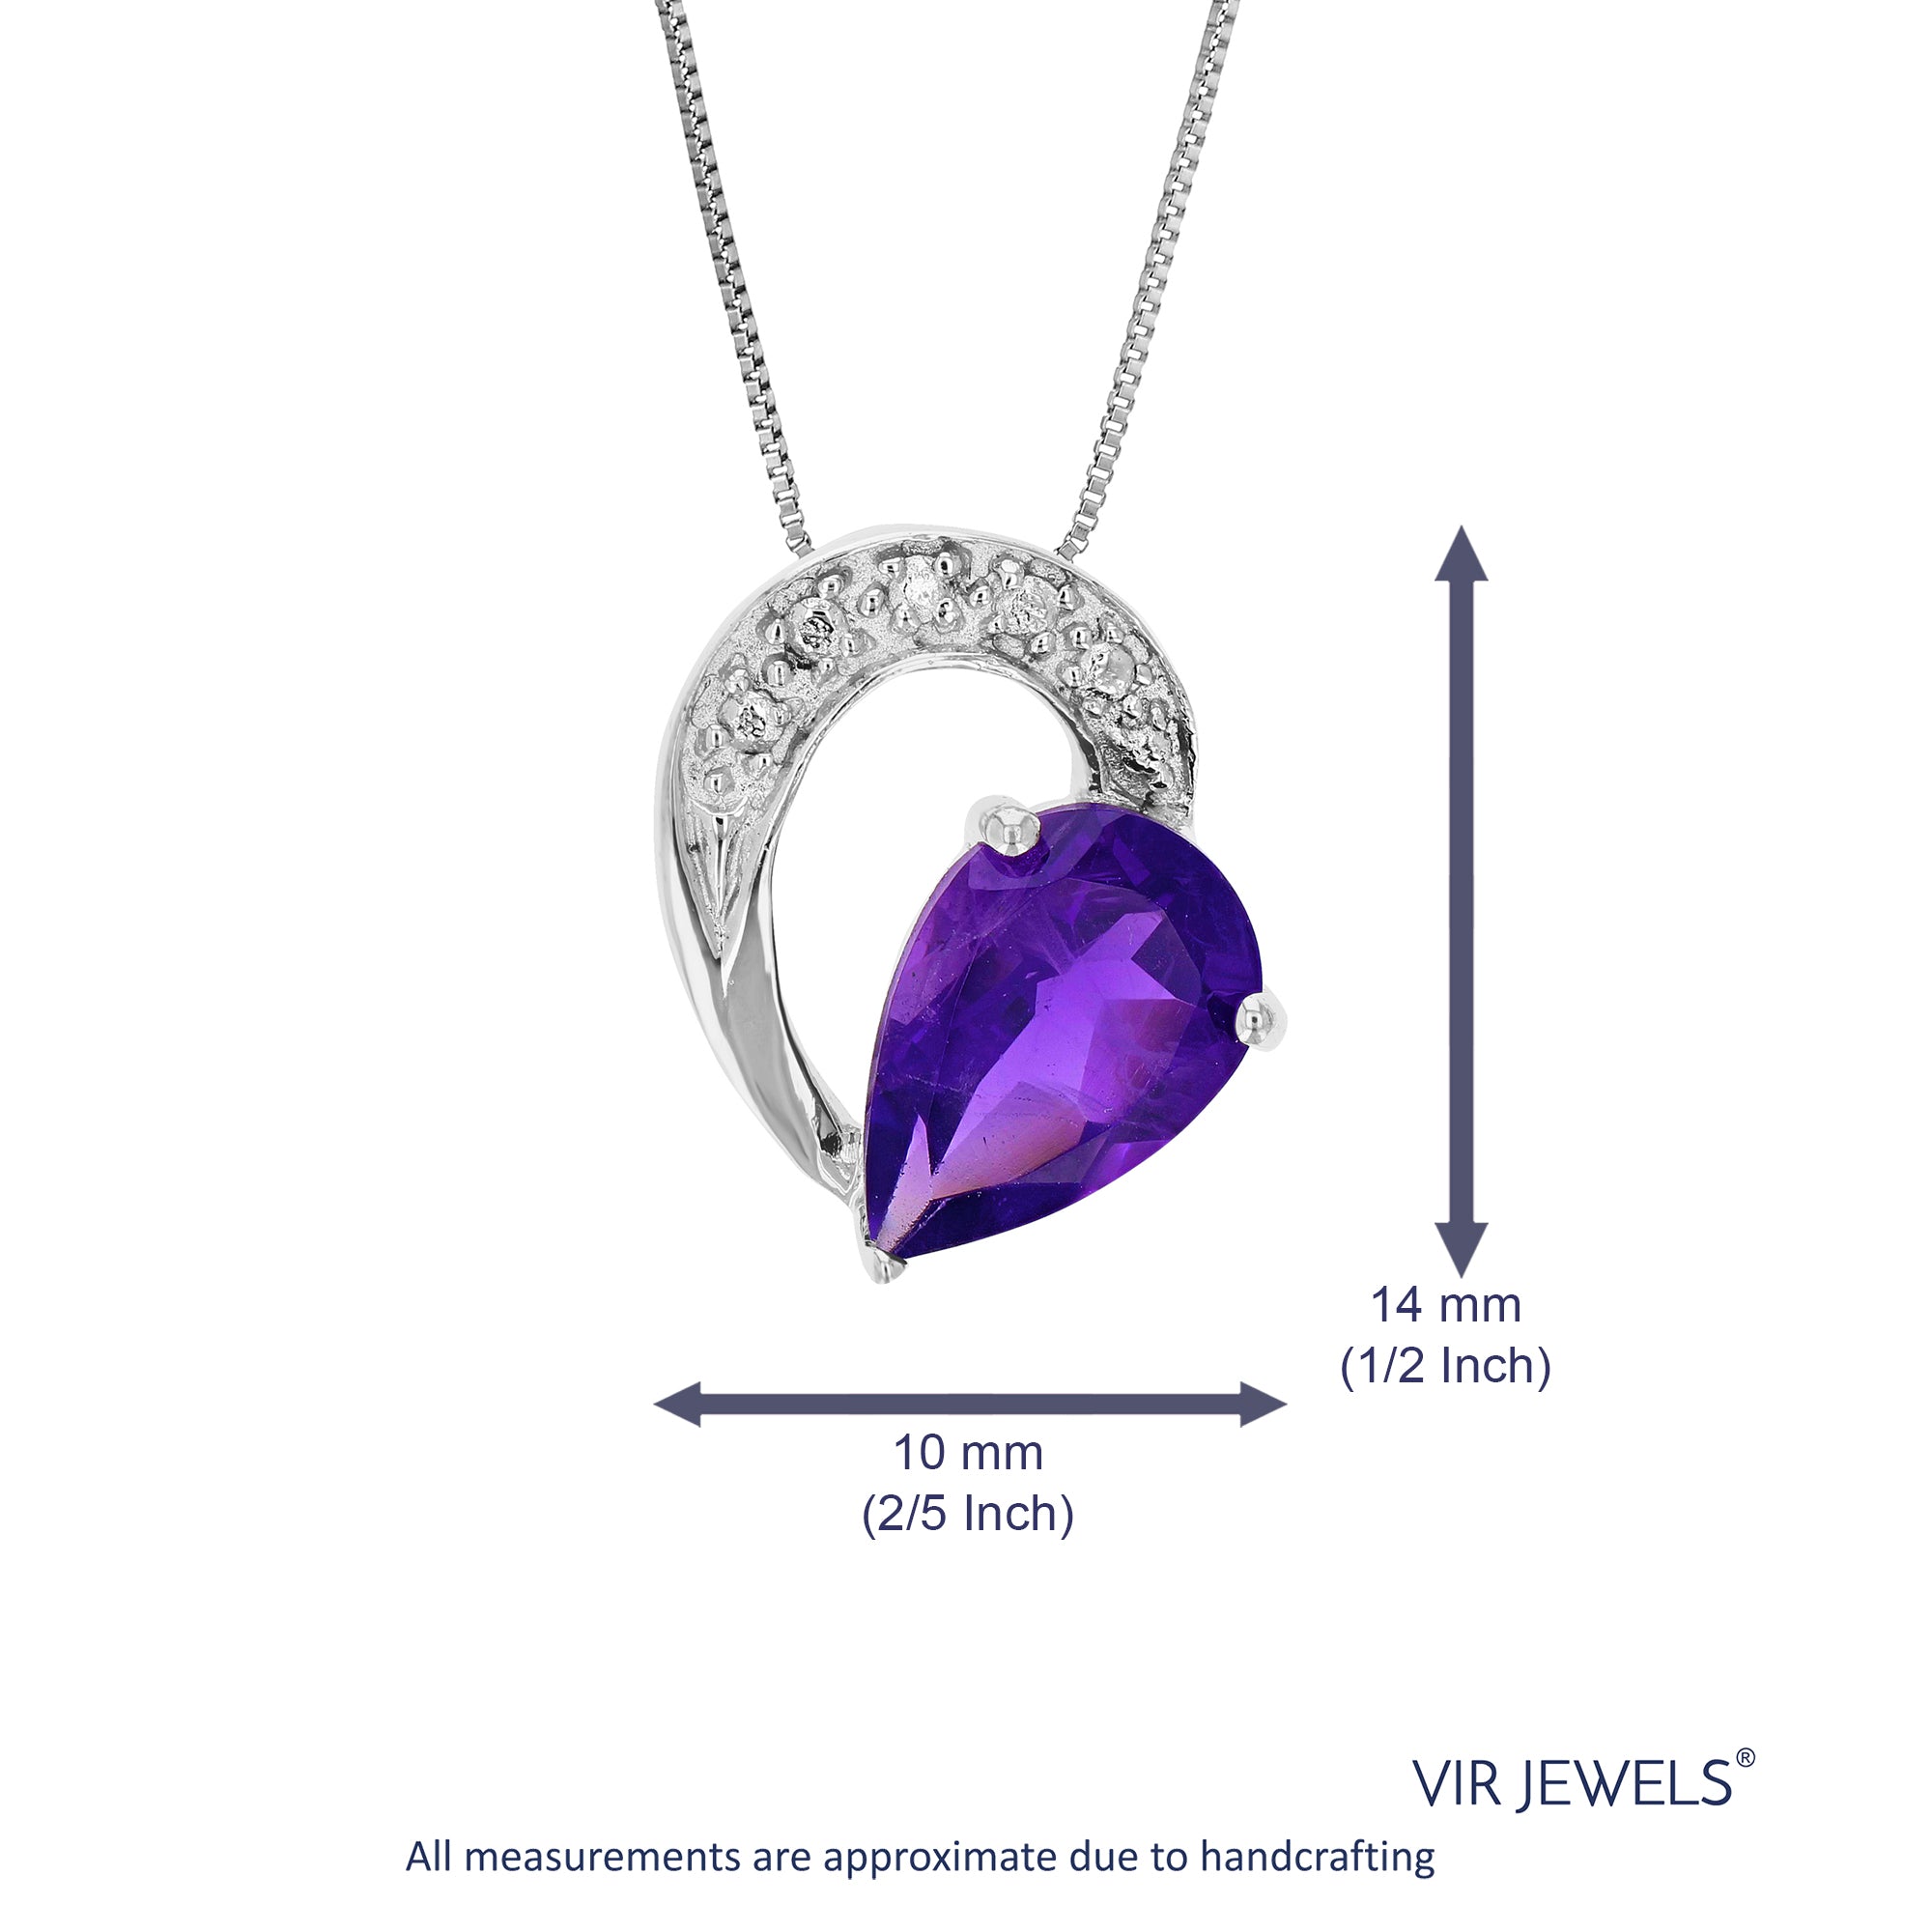 1.10 cttw Pendant Necklace, Purple Amethyst Pear Shape Pendant Necklace for Women in .925 Sterling Silver with Rhodium, 18 Inch Chain, Prong Setting